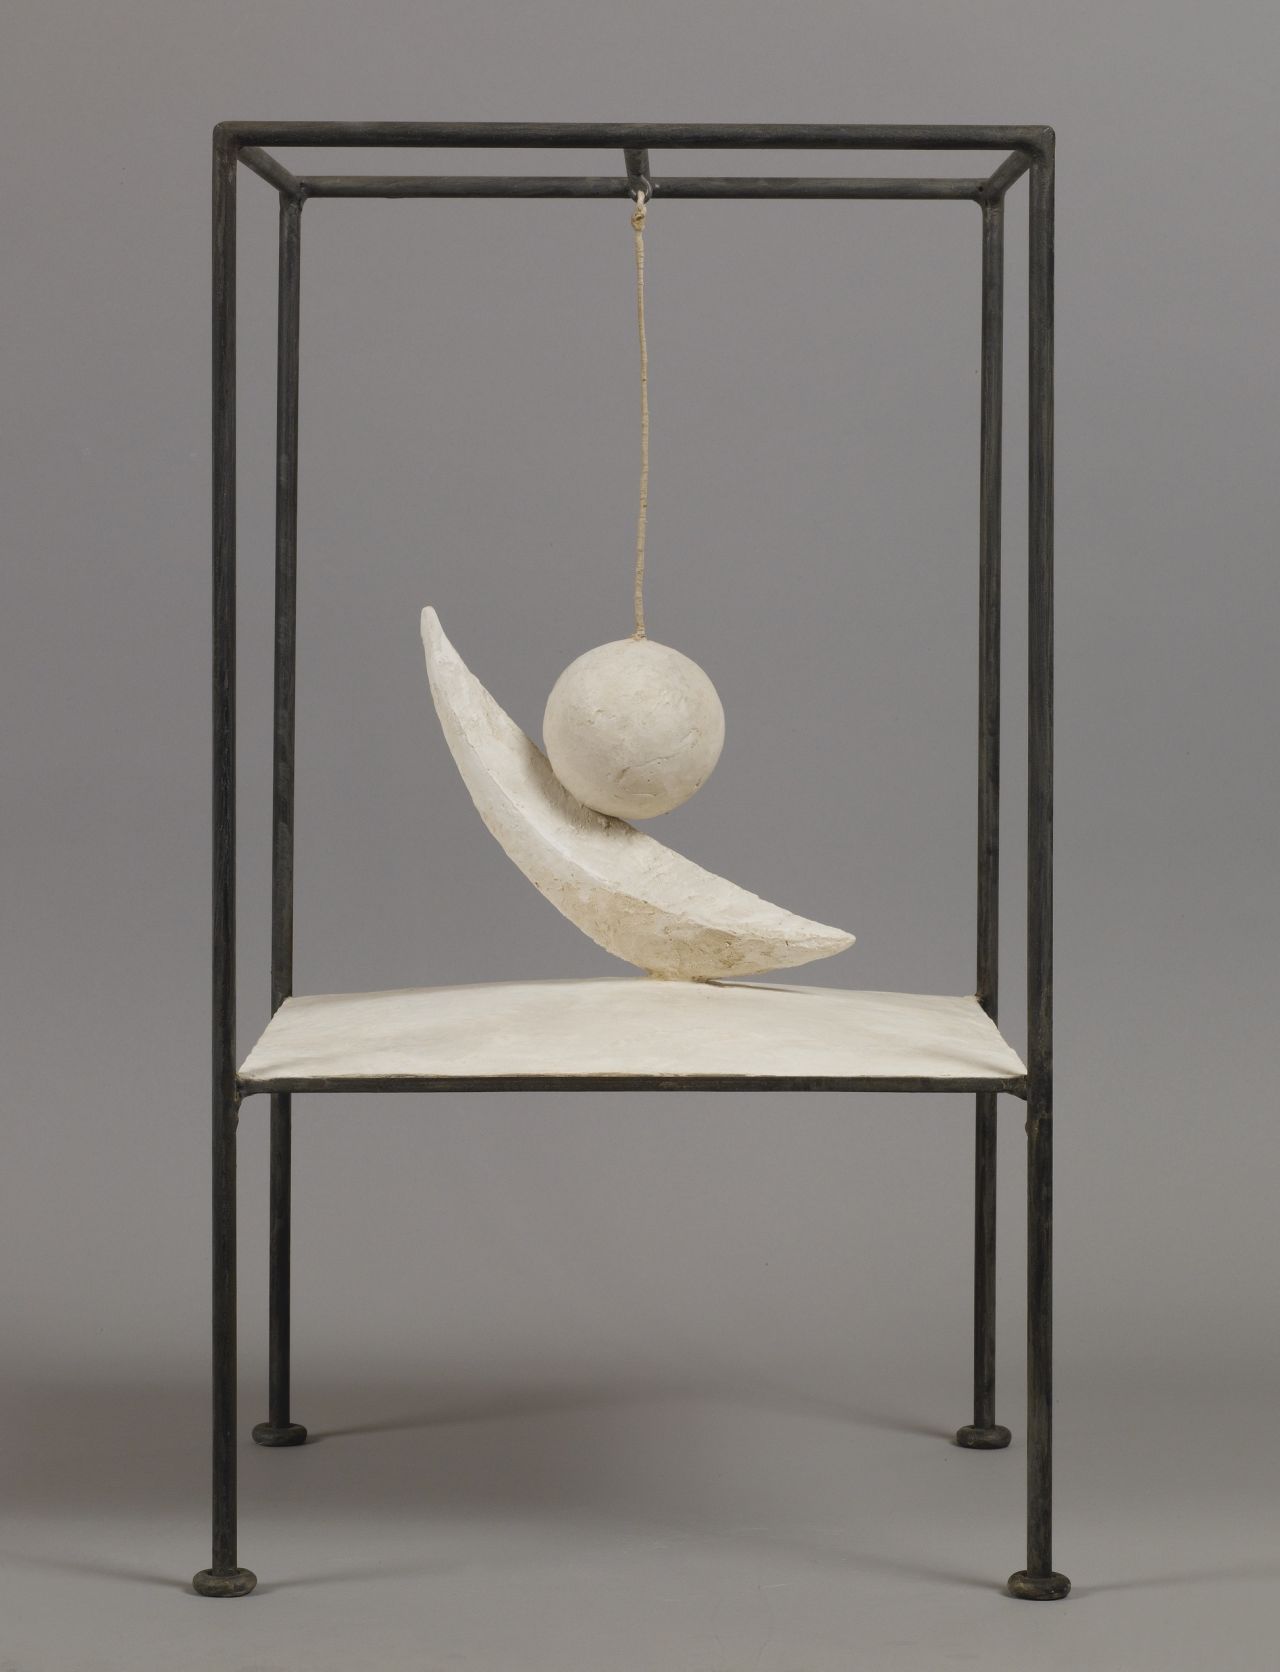 One of Giacometti's celebrated Surrealist works, which still exists today, is the titillating "Suspended Ball."